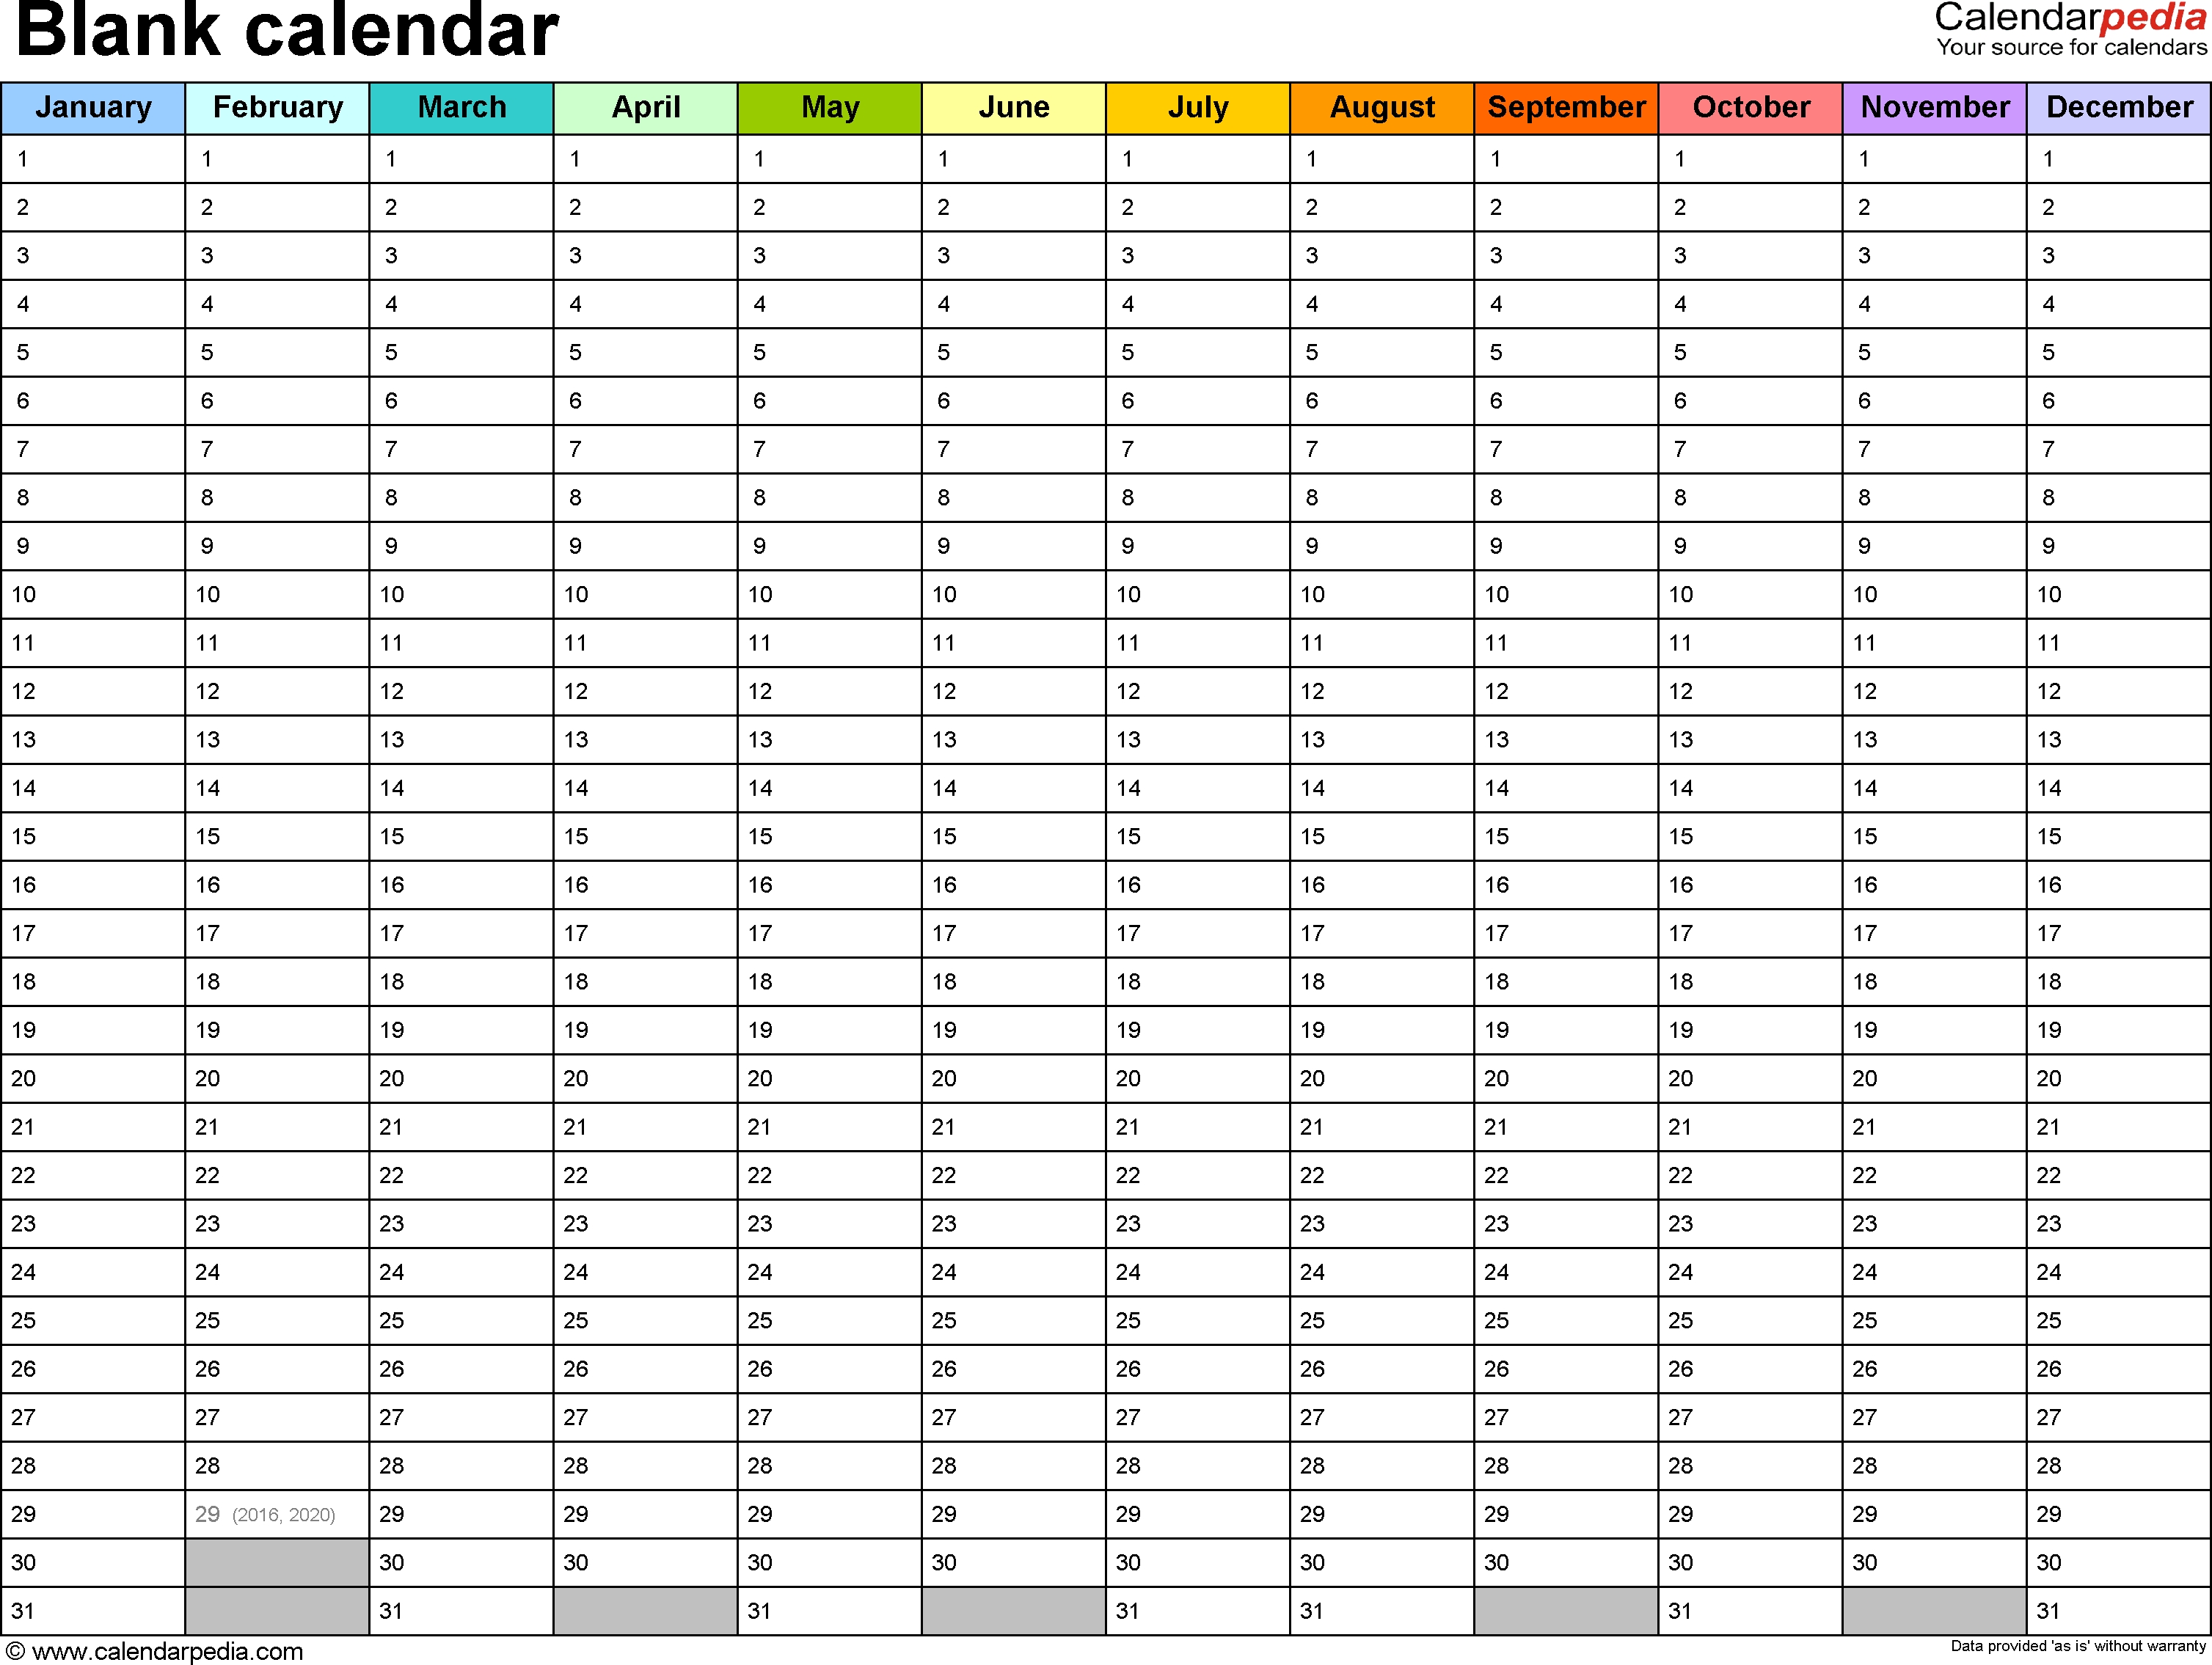 Blank Calendar - 9 Free Printable Microsoft Word Templates throughout Calendar By Day With Printable